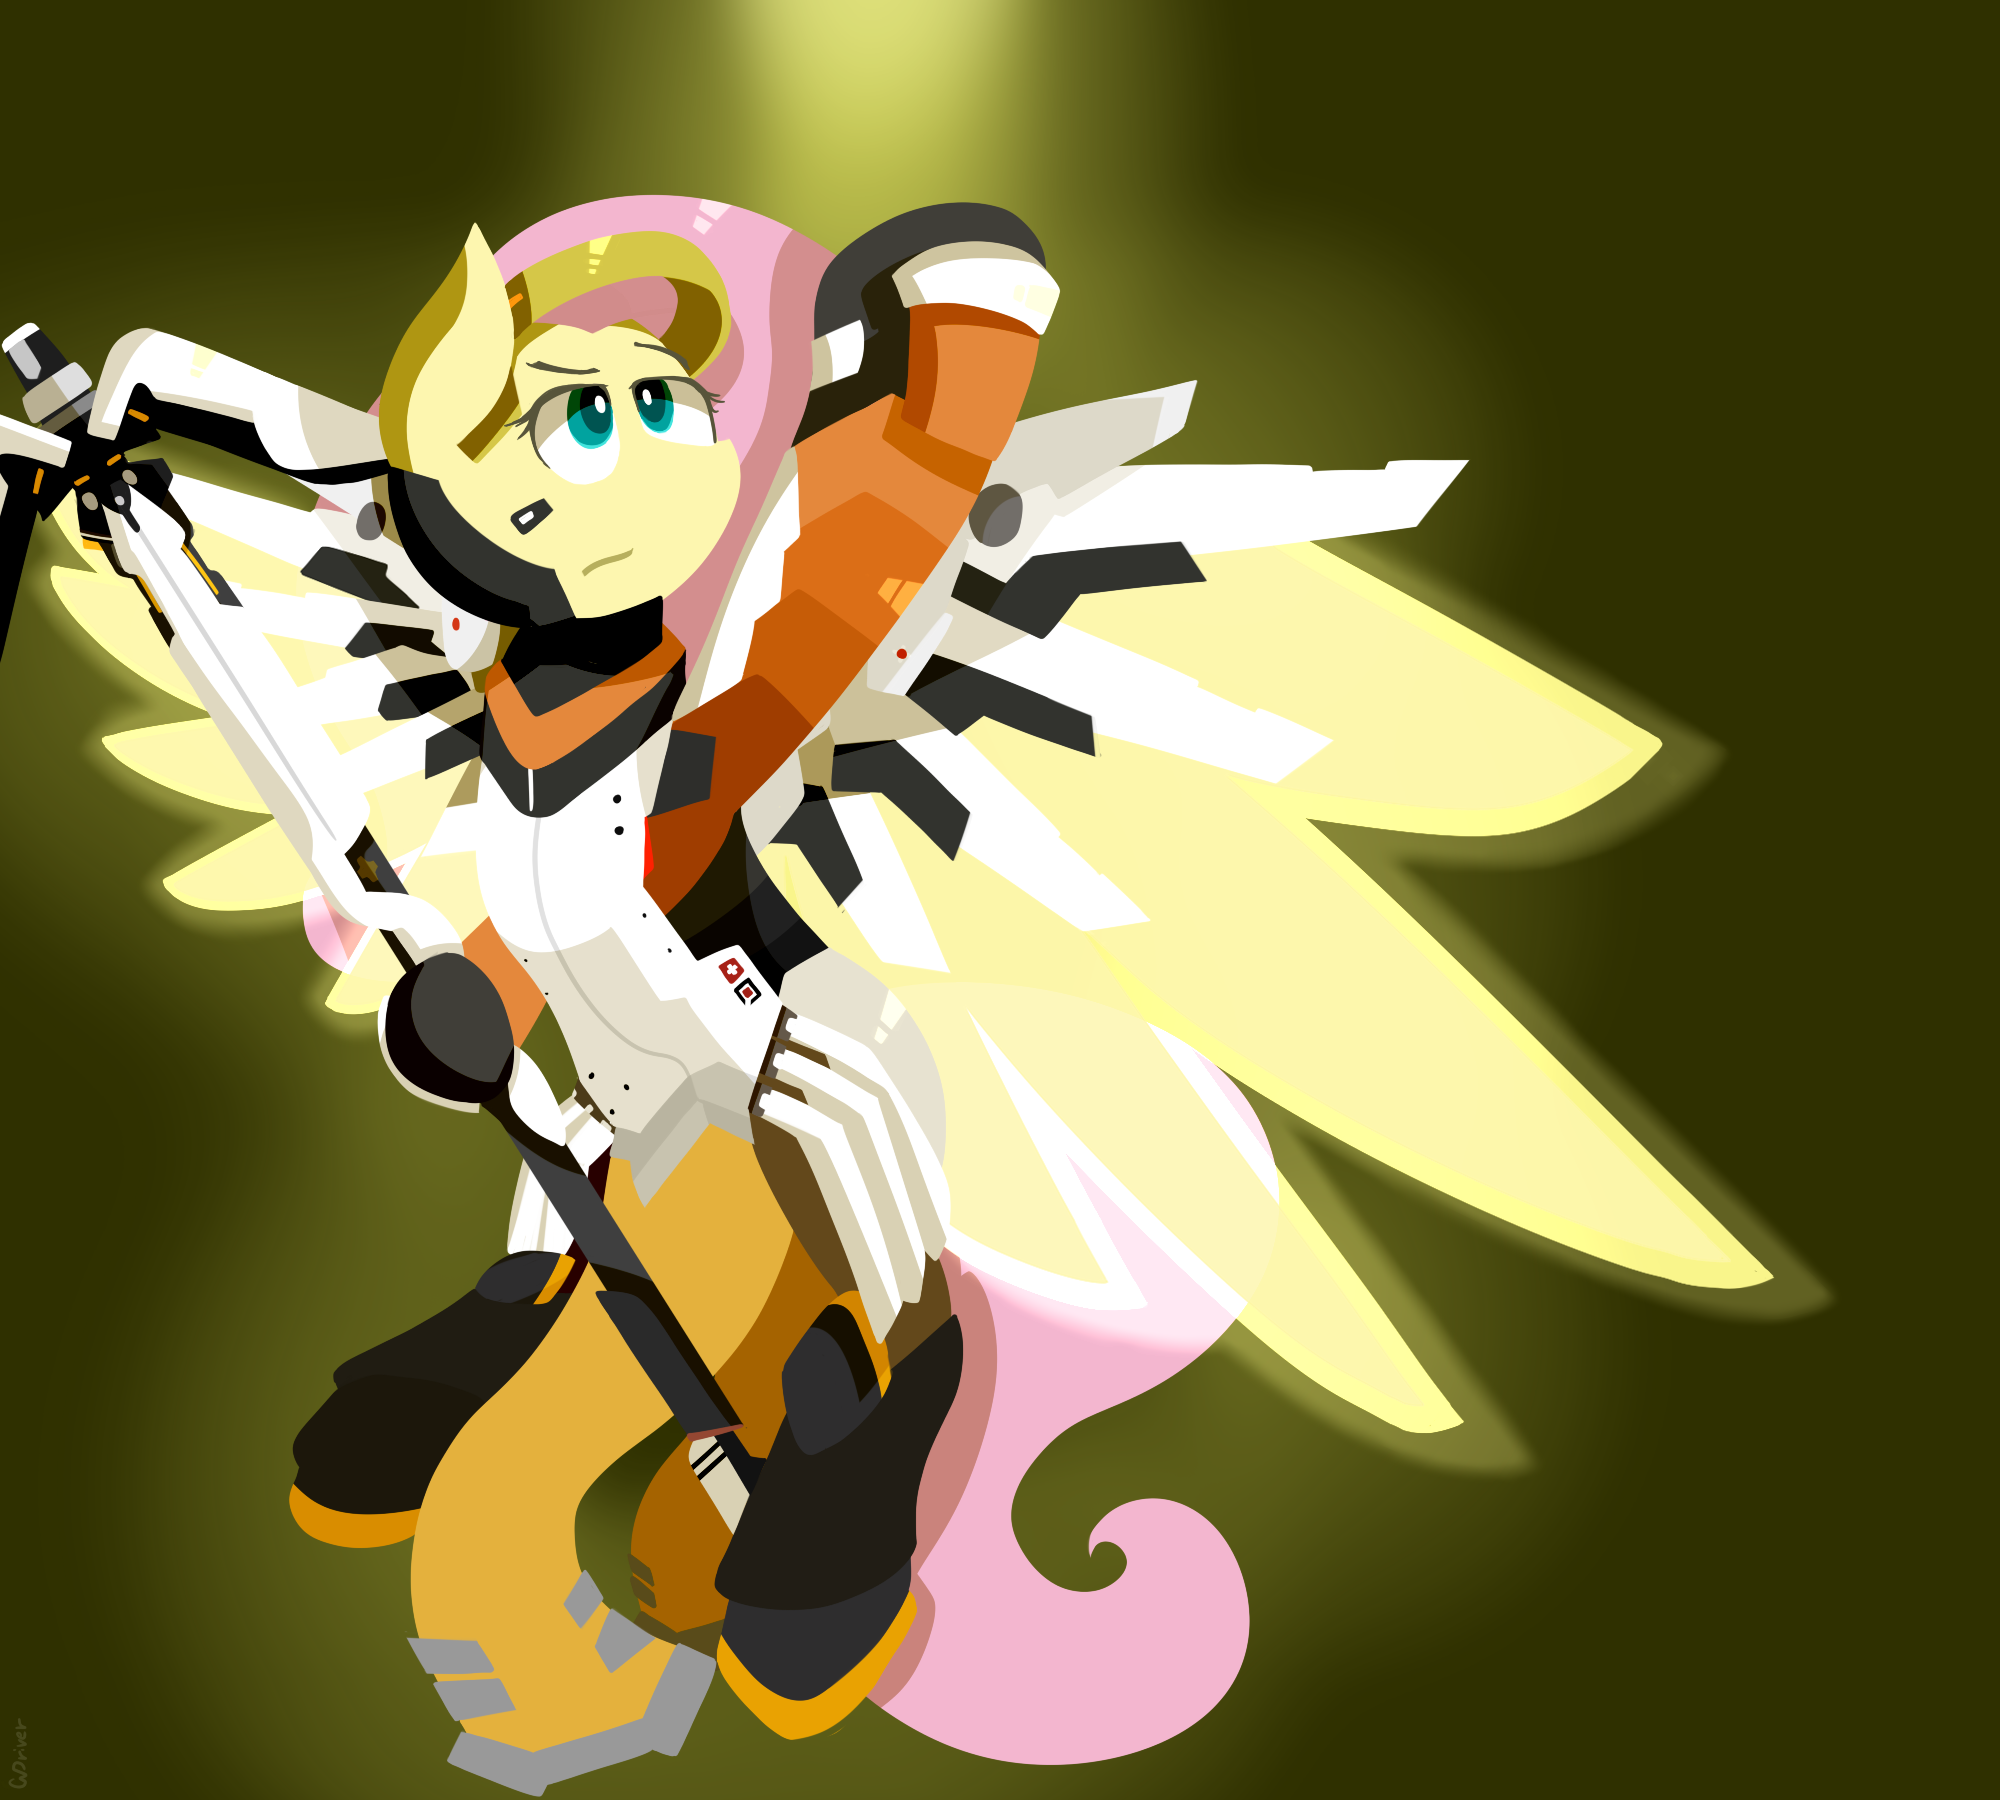 https://derpicdn.net/img/view/2015/10/7/996646__safe_fluttershy_crossover_overwatch_artist-colon-gndriver_mercy_mercyshy.png